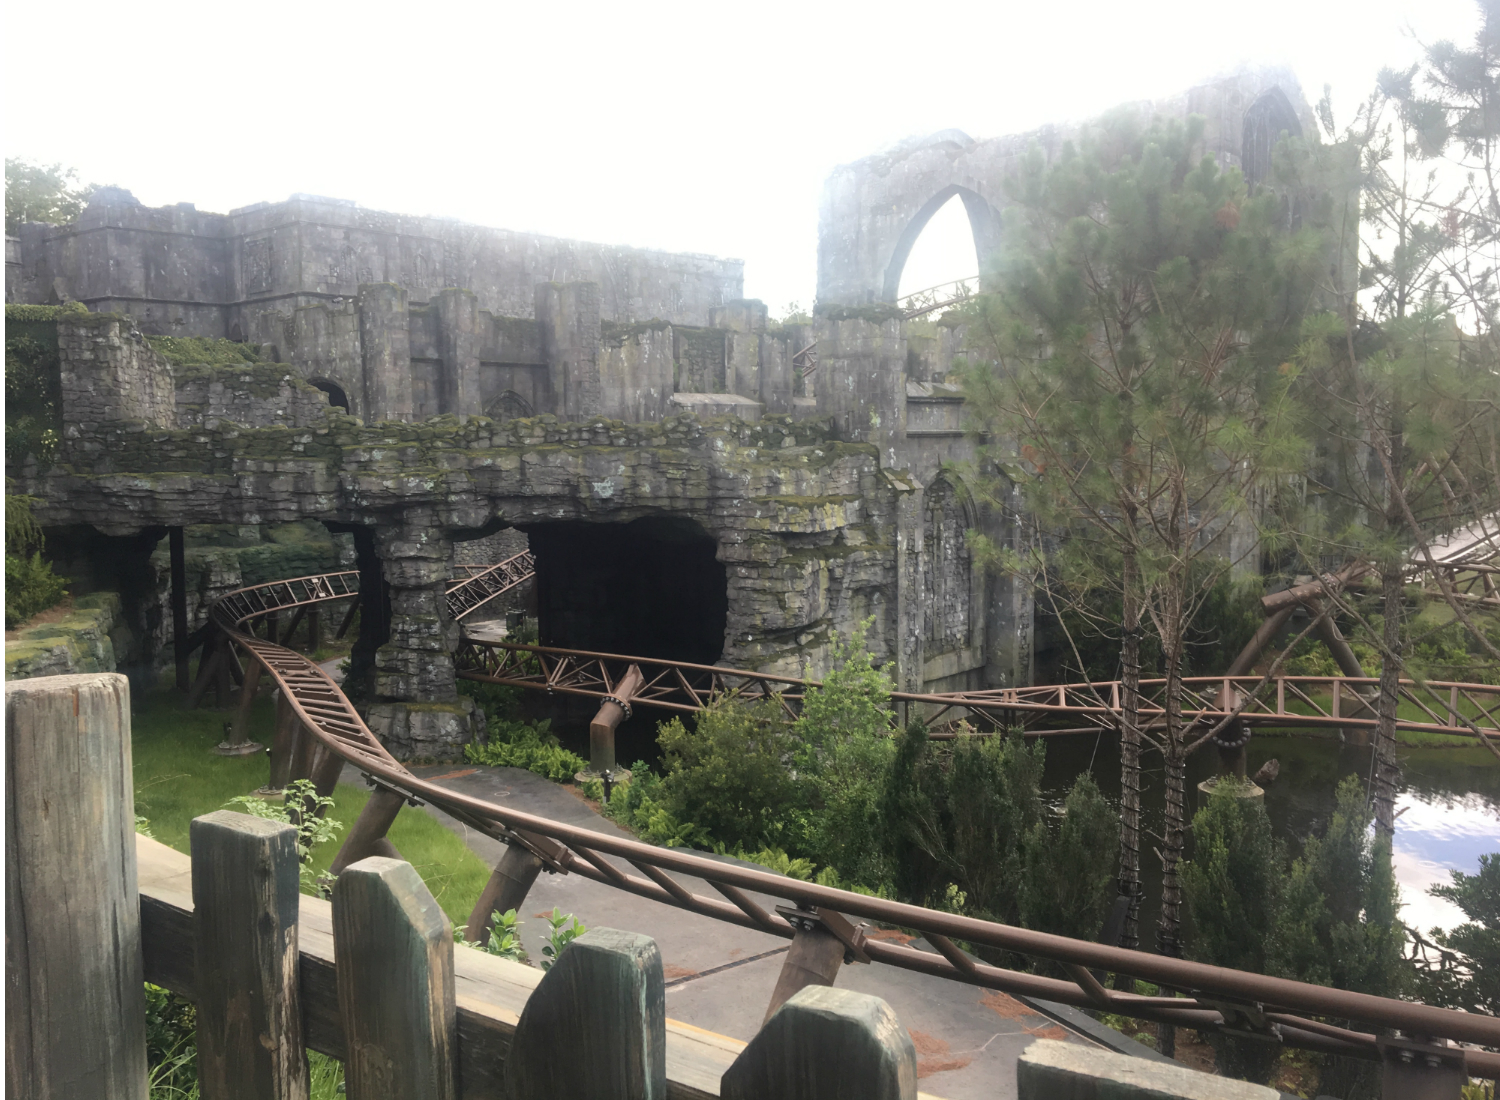 Hagrid's Magical Creature Motorbike Adventure has lots of magical twists and turns along the tracks.